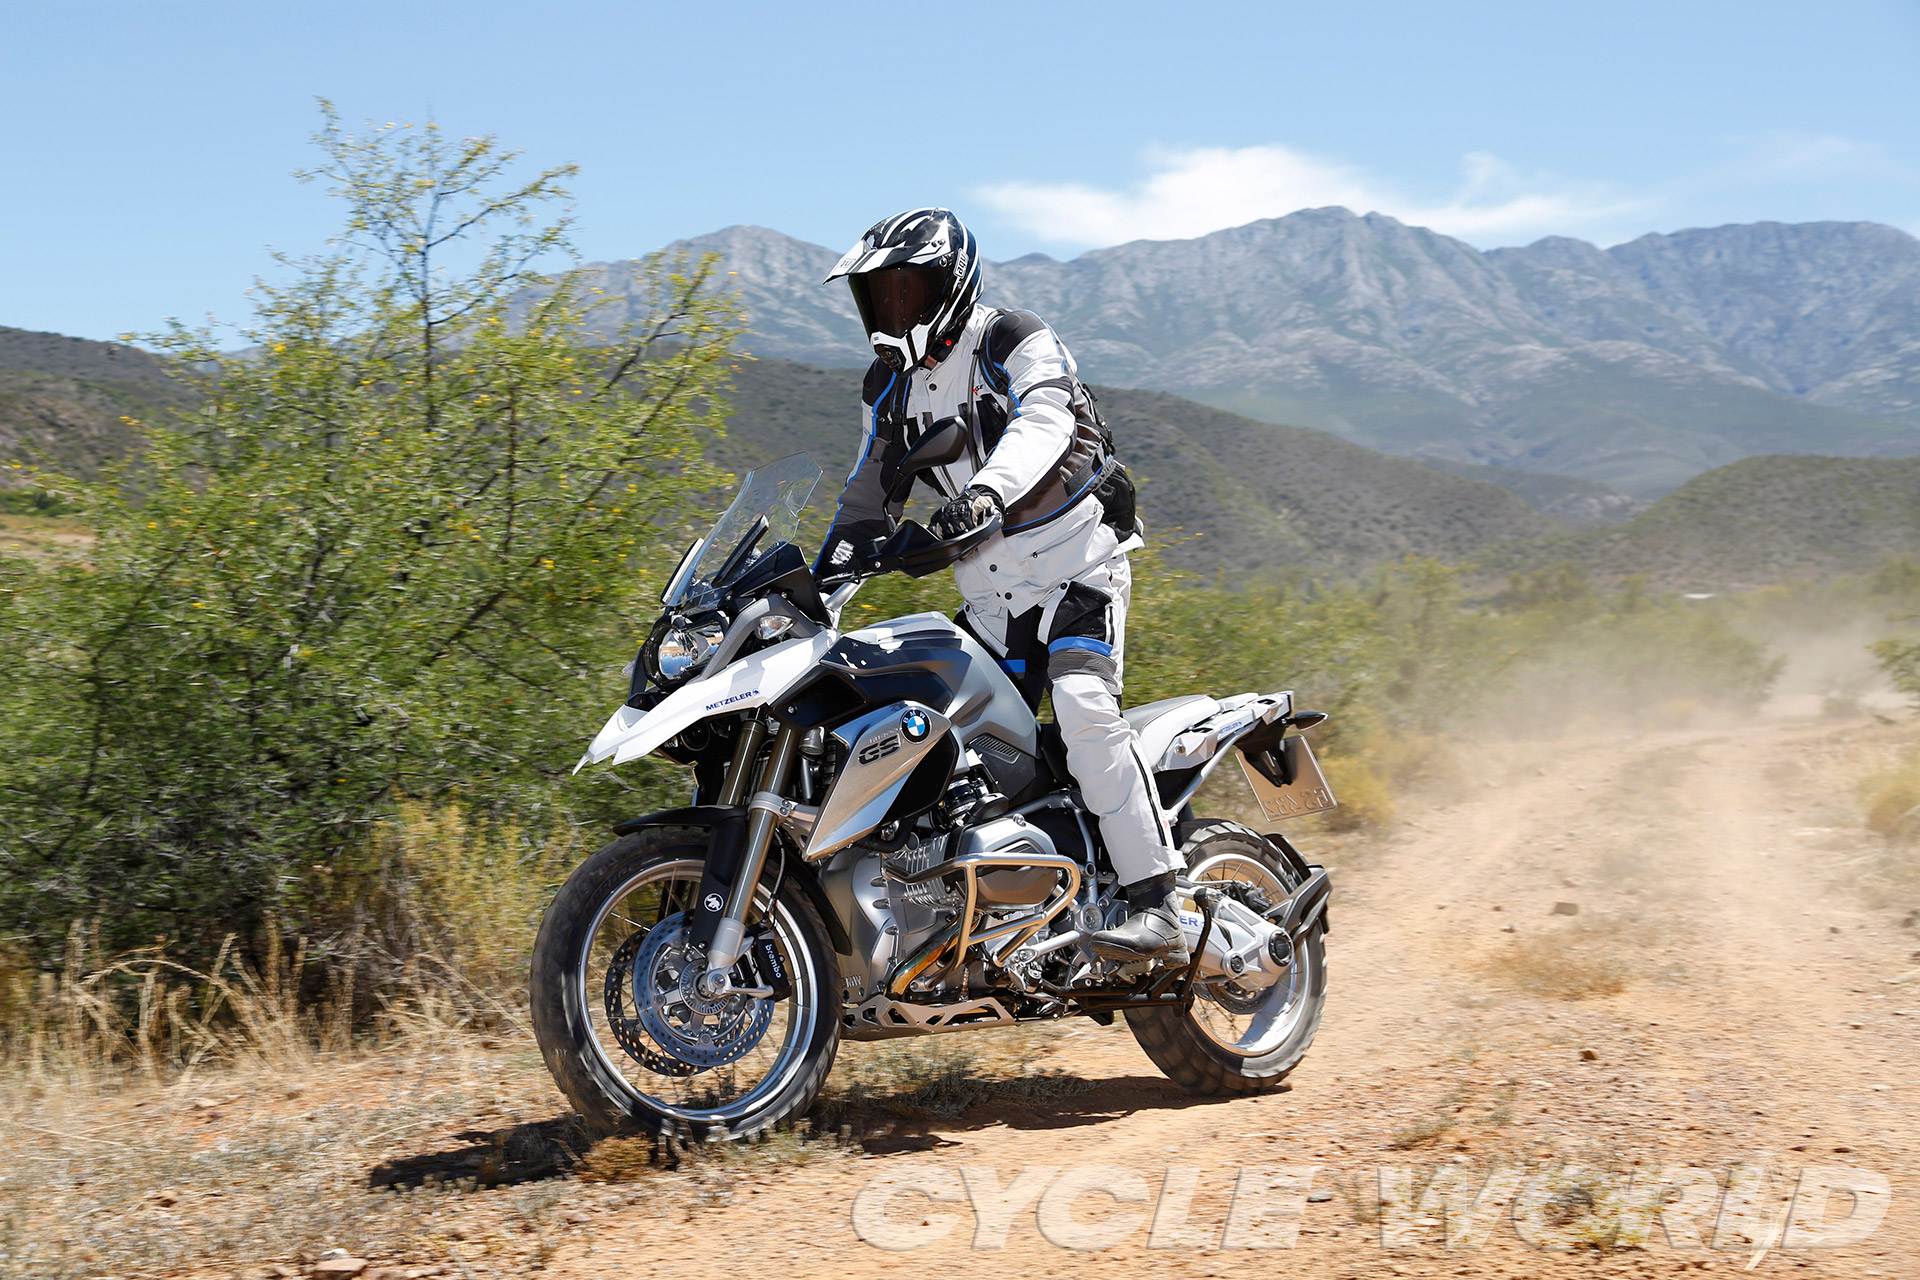 RIDE 3 - BMW R 1200 GS Pack Download Without License Key